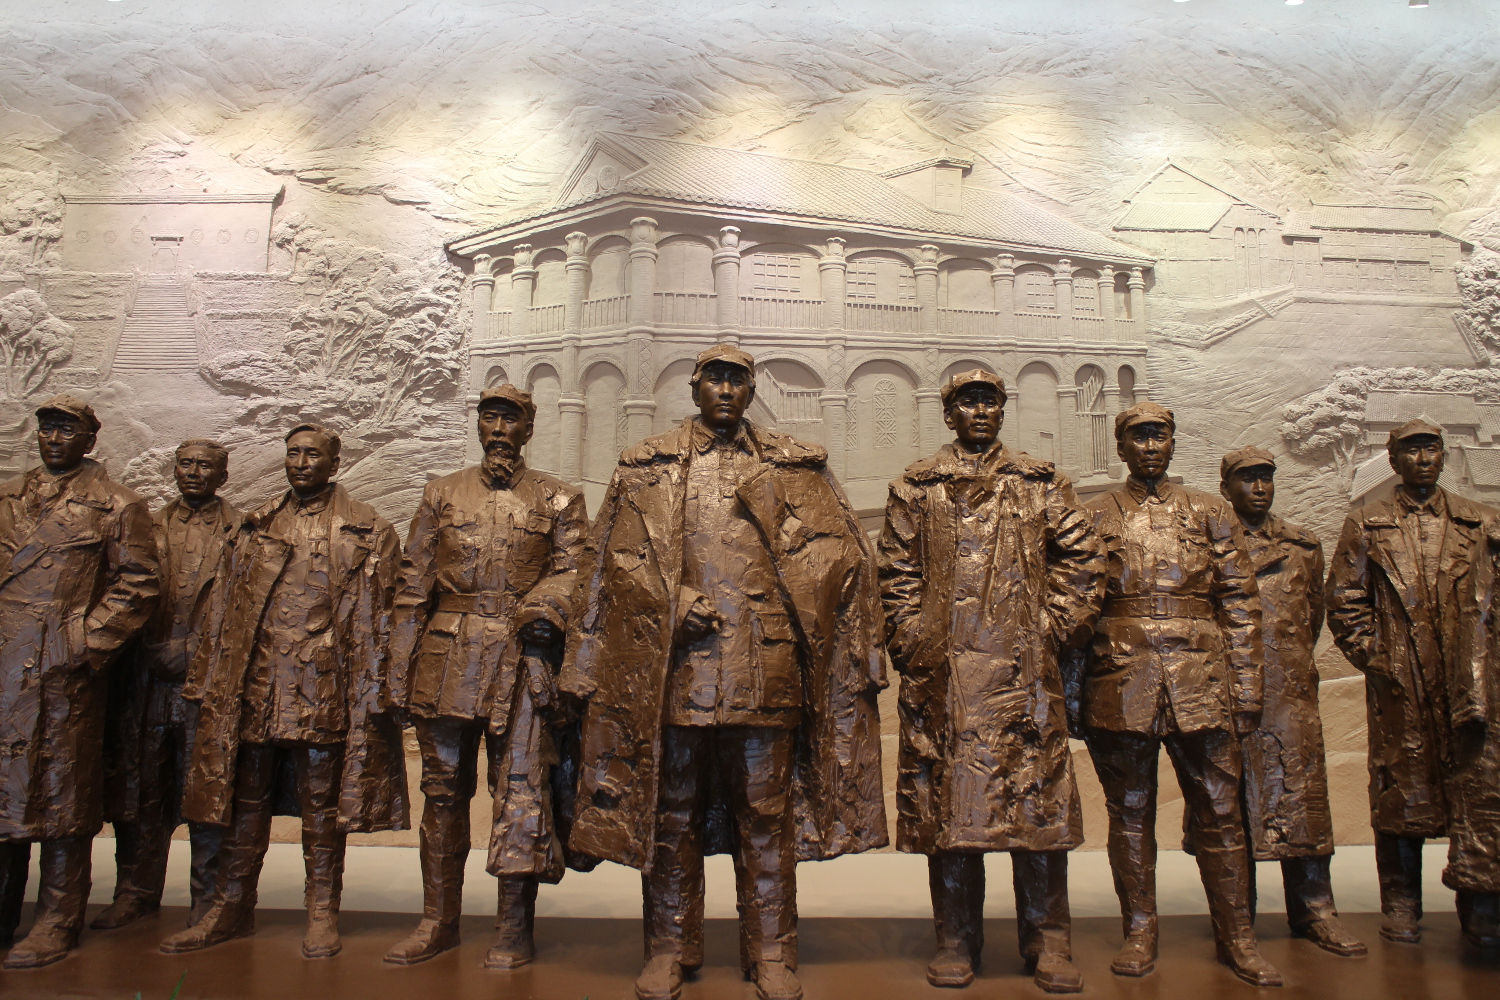 Mao Zedong and fellow revolutionaries depicted at the Zunyi Meeting Museum. Image by Thomas Bird / londoninfopage